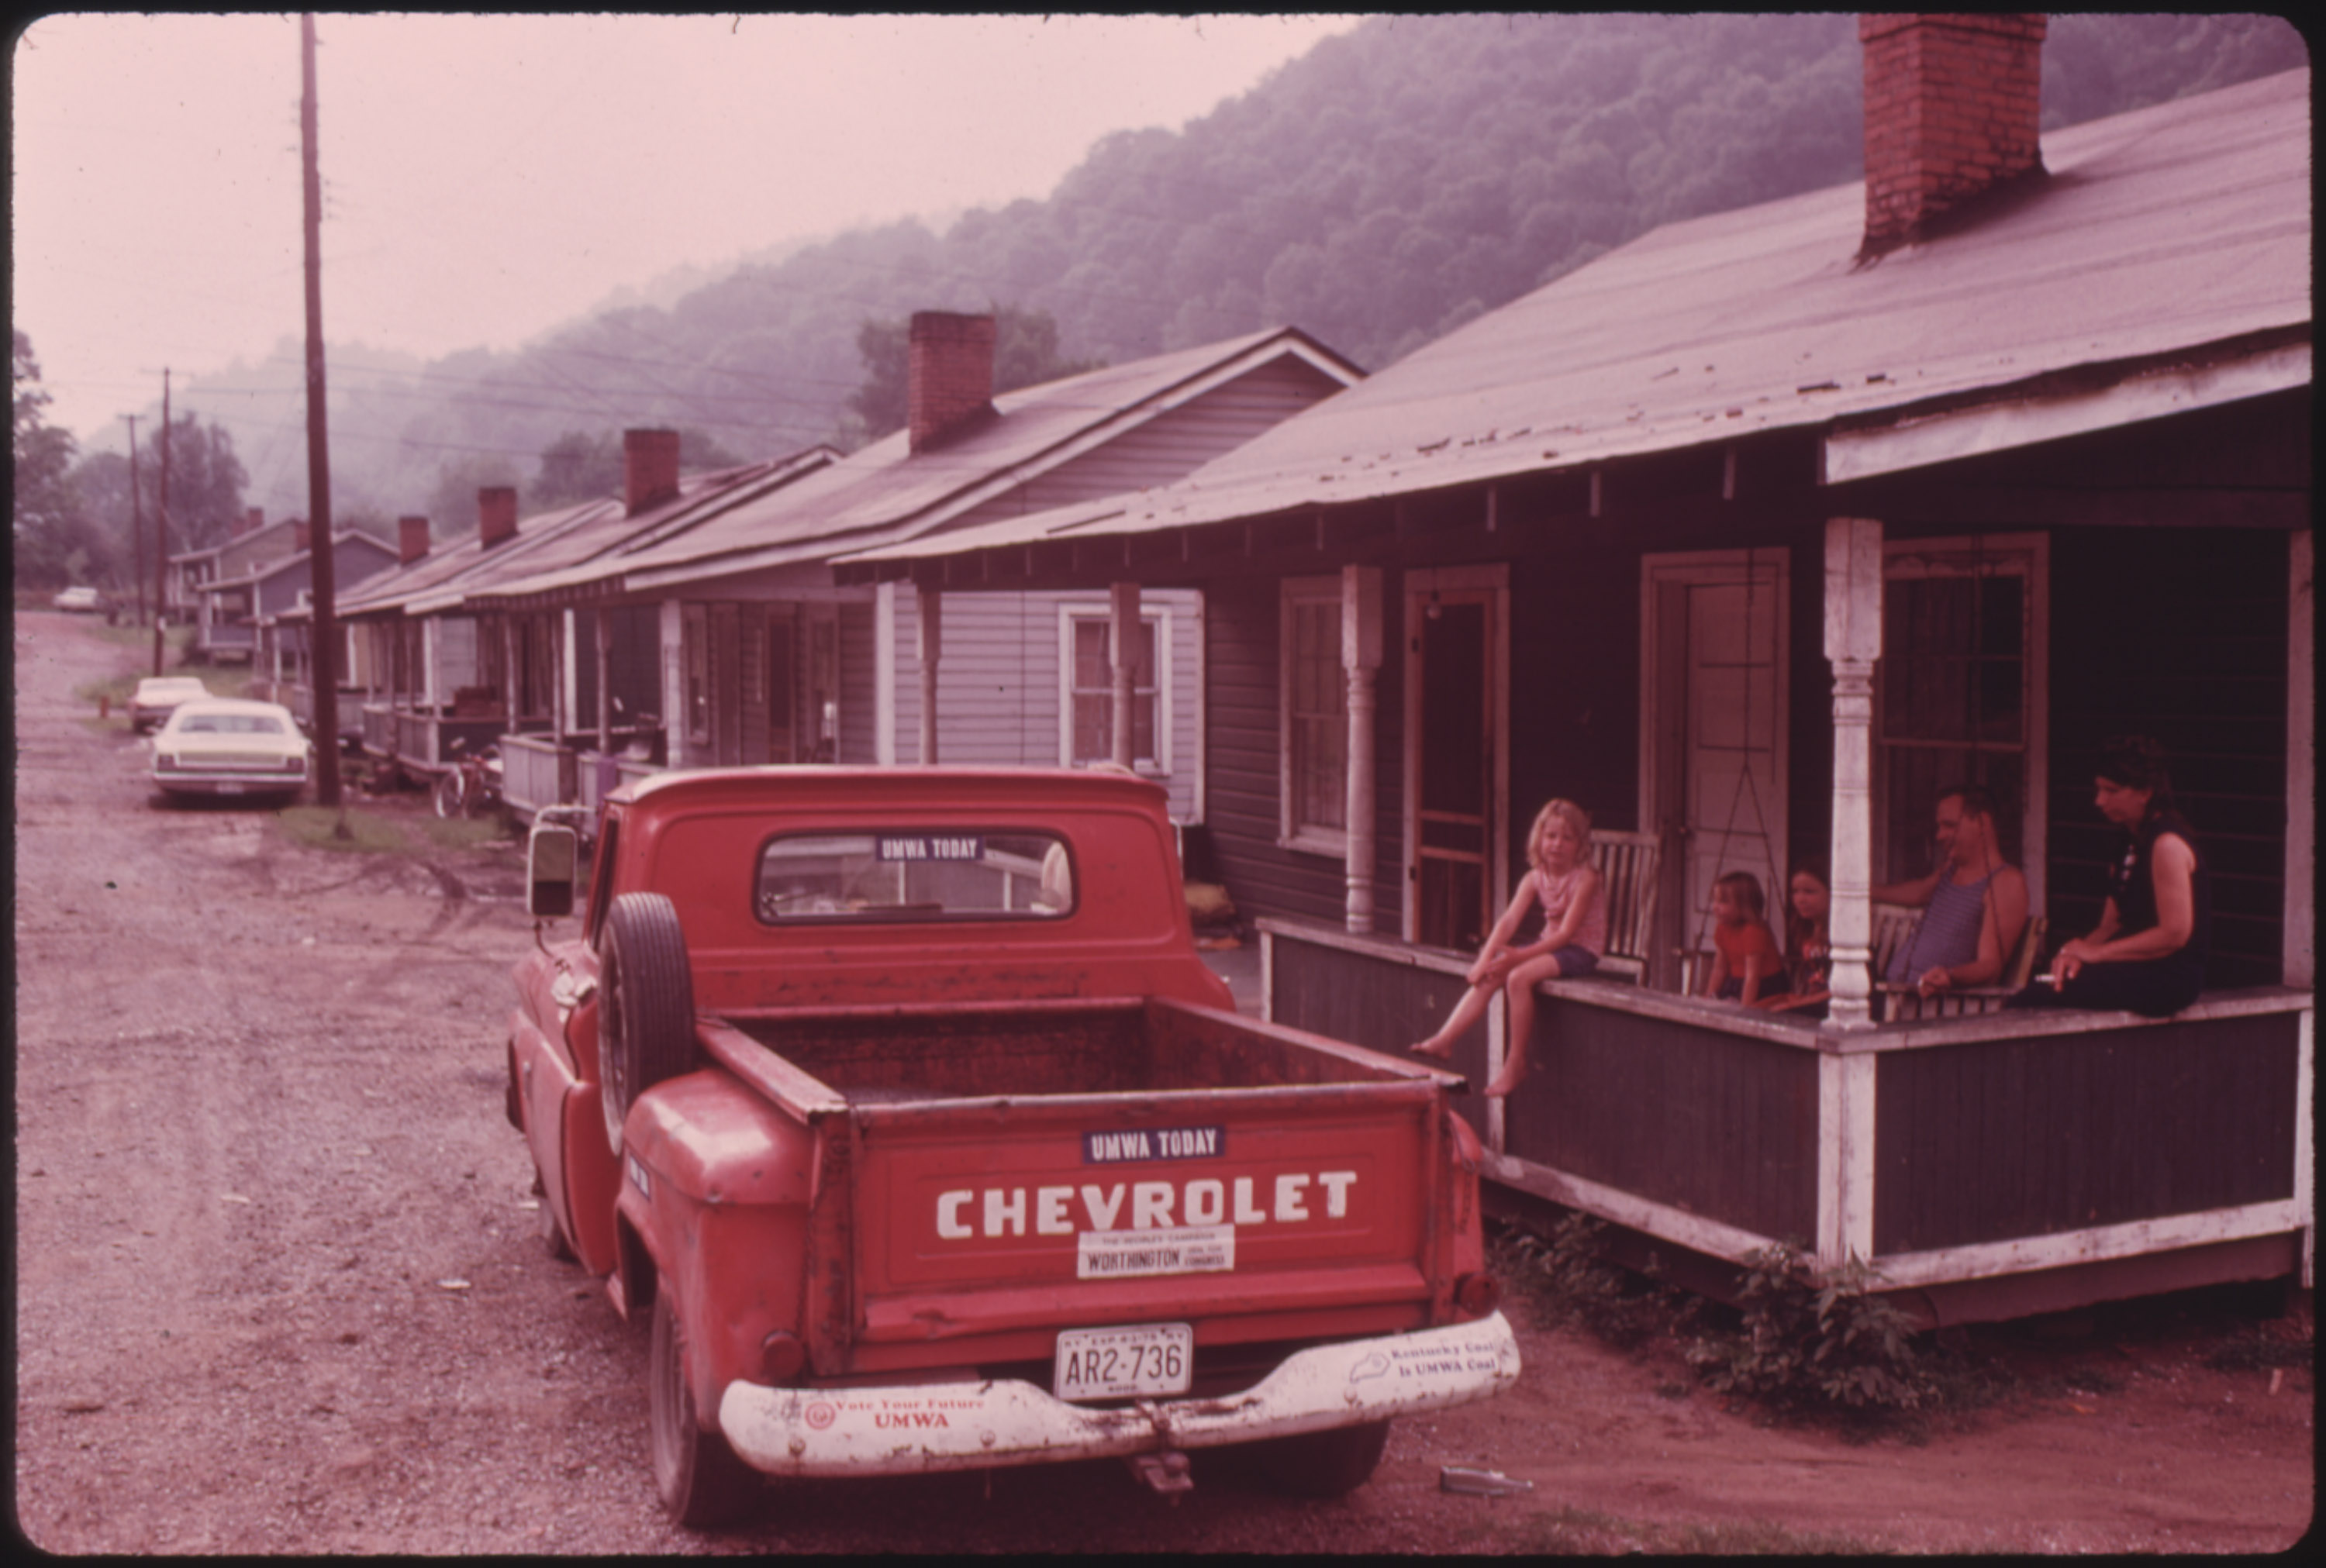 Row of Miners' Homes in the Brookside Mine Company Town of Brookside Kentucky, near Middlesboro 06/1974